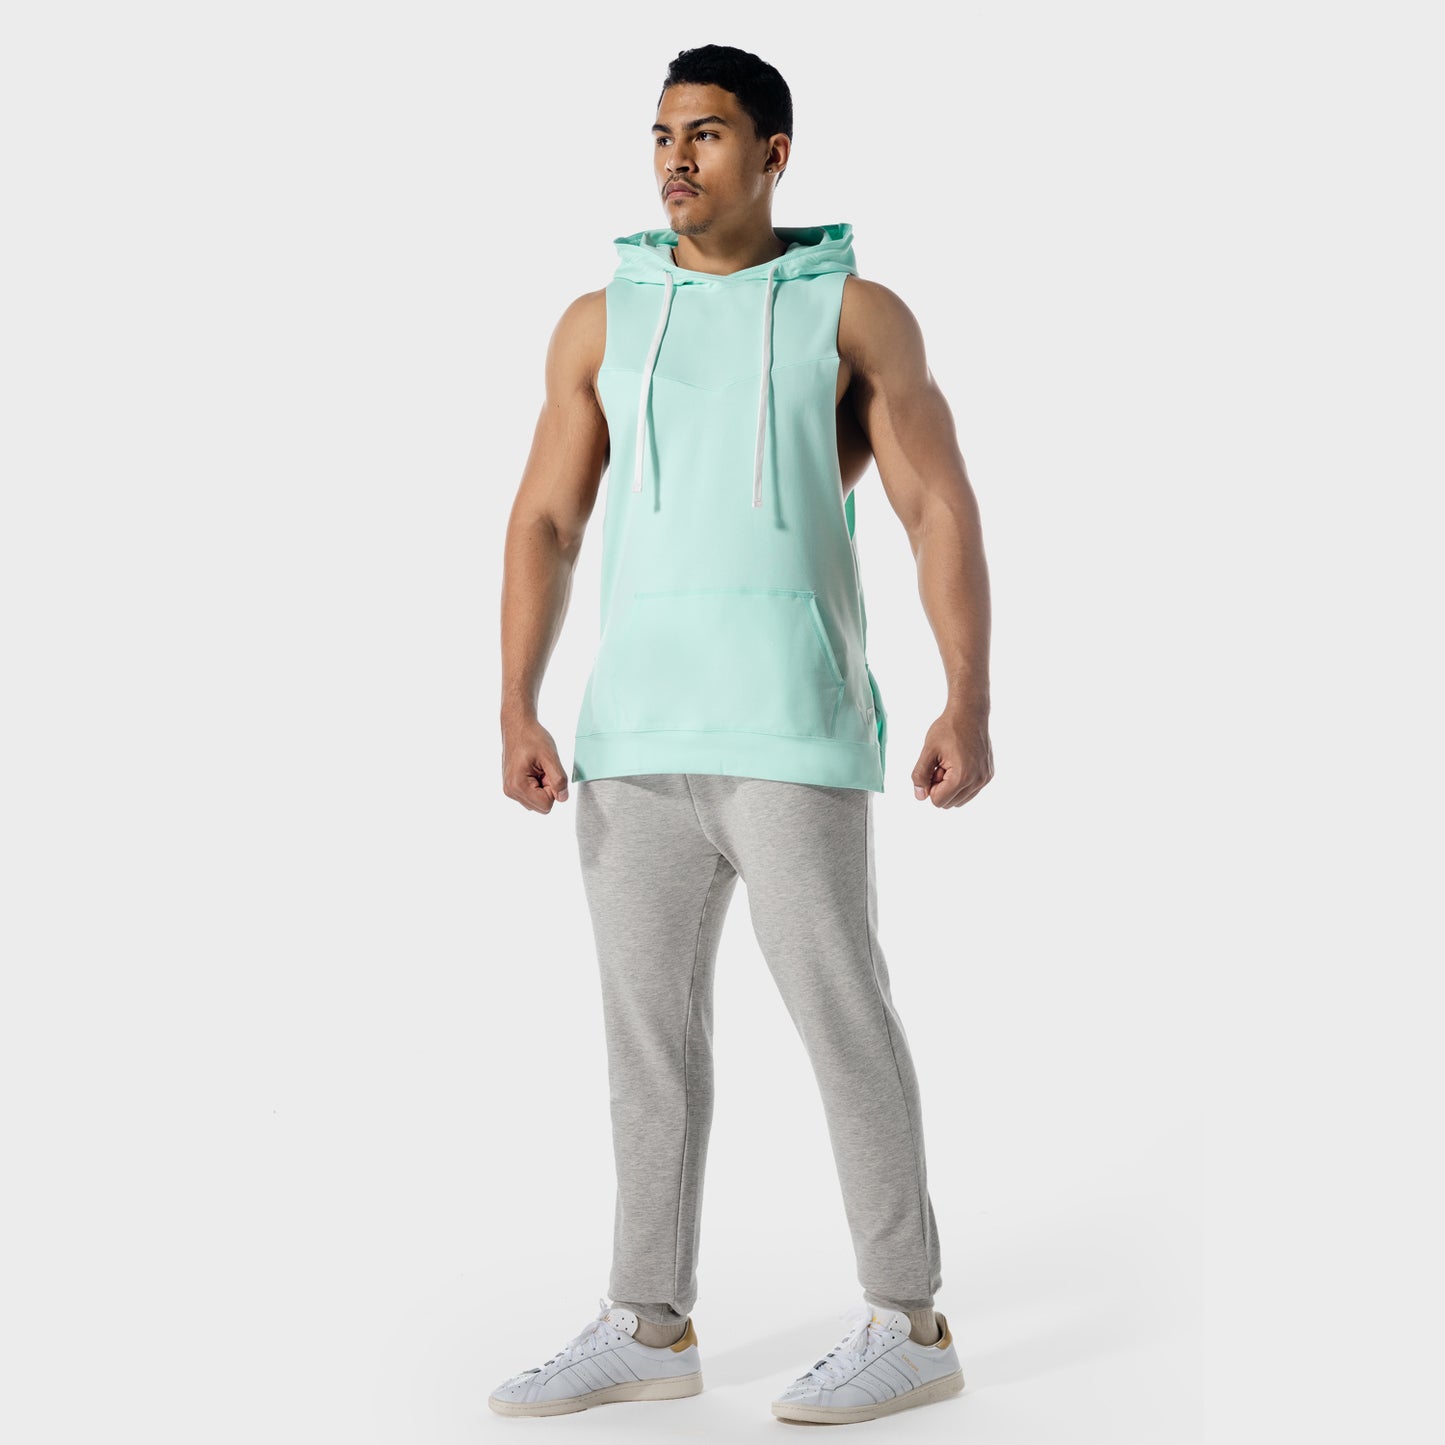 squatwolf-sleeveless-gym-hoodies-adonis-sky-blue-workout-clothes-for-men